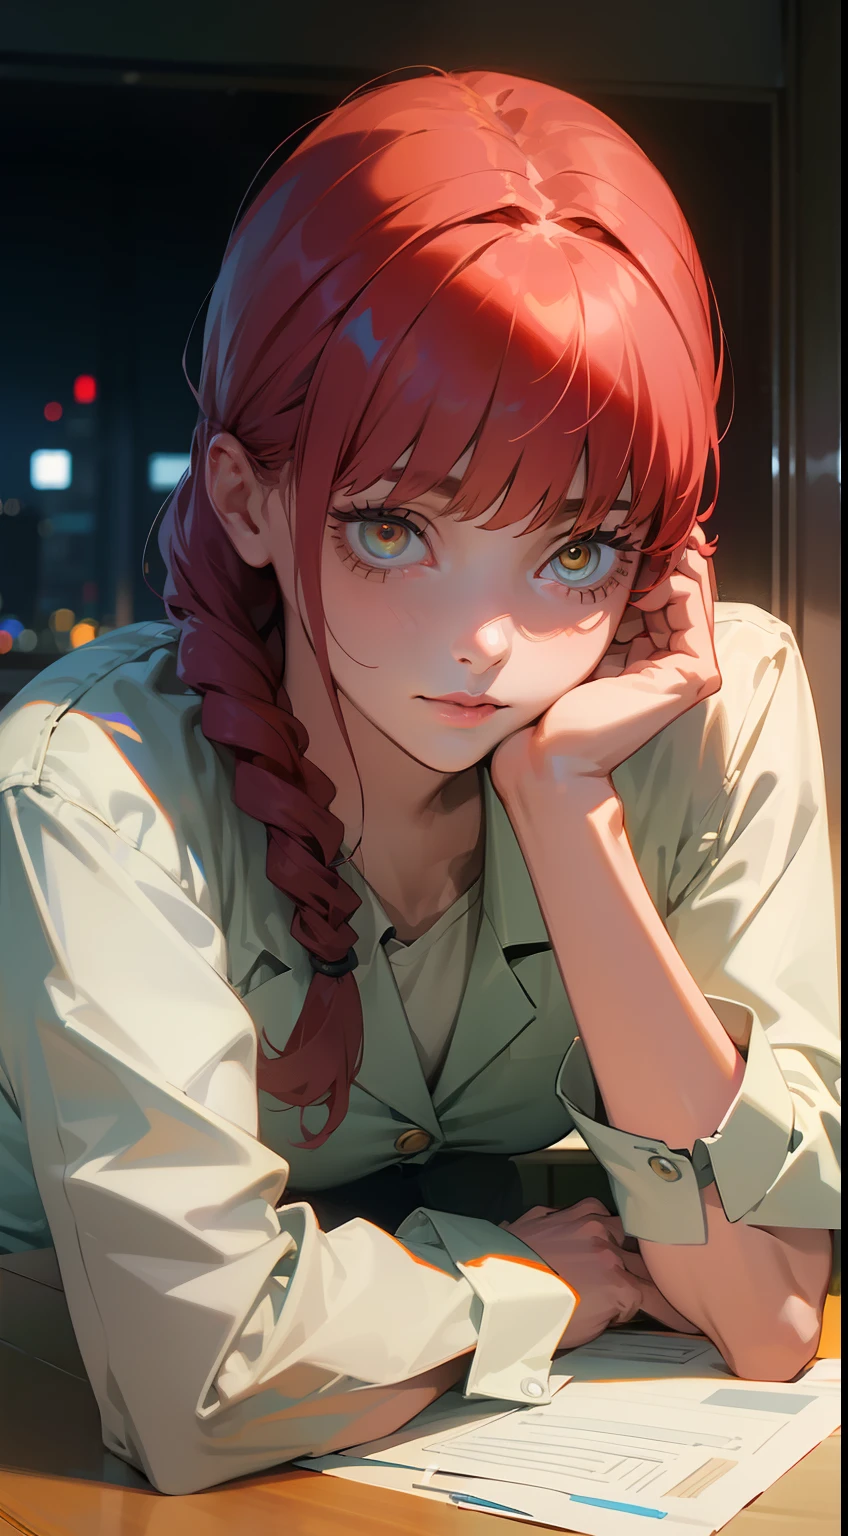 (best quality,realistic:1.37),ultra-detailed,professional,portrait,sharp focus,physically-based rendering,studio lighting,vivid colors,bokeh,photorealistic,photography,red theme,lighting effects, Makima from Chainsaw Man anime, detailed facial features,beautiful eyes,expressive look,rosy cheeks,dark makeup,long nails,classy appearance,happy expression, seductive pose,modern office scene,high-rise city view,glass windows,city lights,computer monitors and keyboards,office desk with papers,phone on the desk,books and folders neatly arranged,professional attire,well-fitted blazer,button-up shirt,pencil skirt,high-heeled shoes,stylish accessories,wristwatch,handbag,sleek hairstyle,polished appearance.